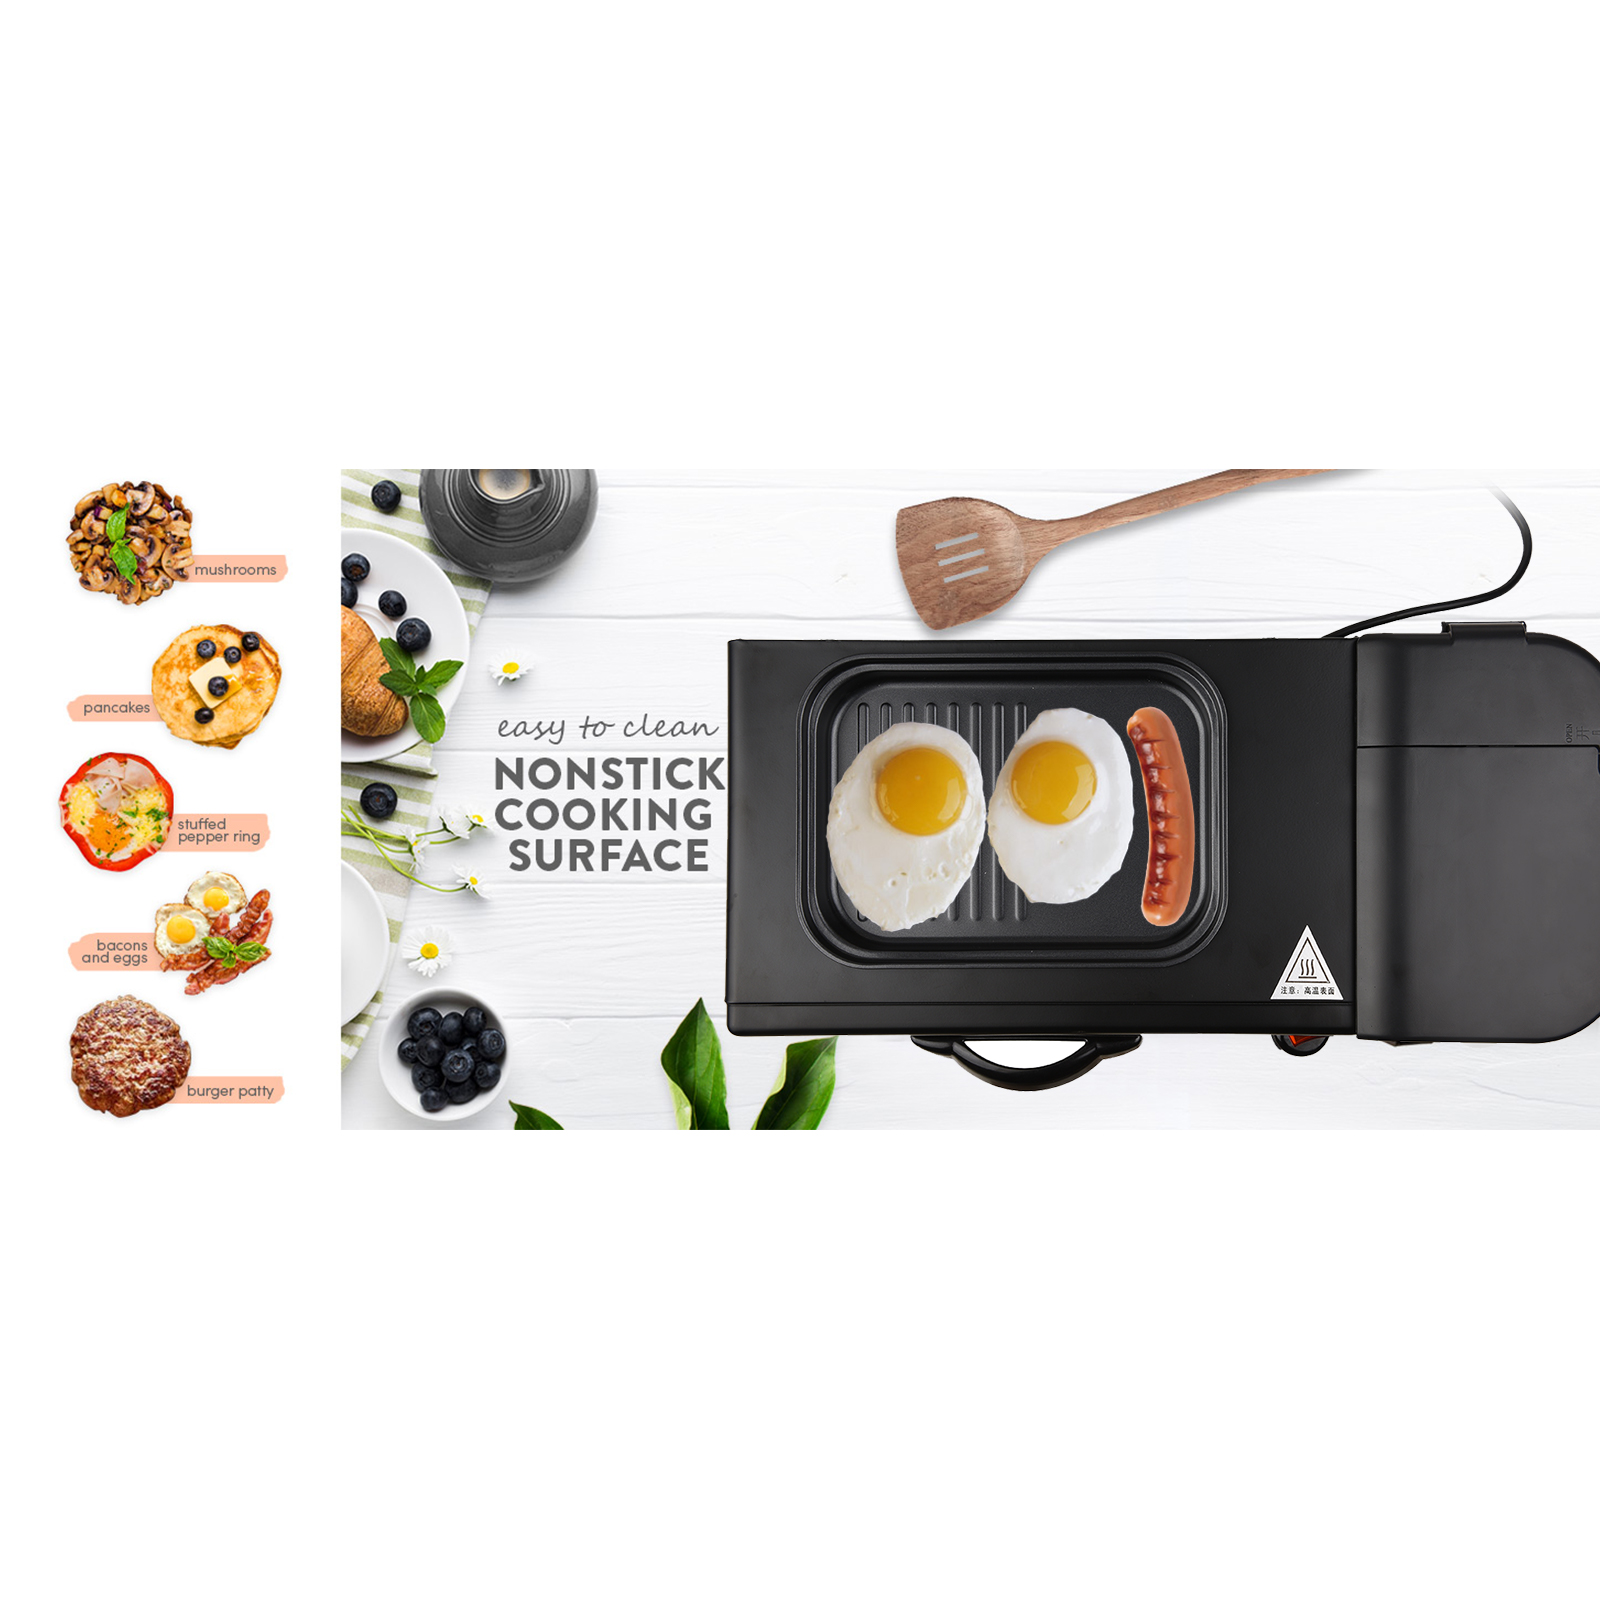 Breakfast Makers, Gourmia GBF370 3 in 1 Breakfast Station Center - 2 Slice  Toaster - Egg Cooker and Poacher - Vegetable, Bacon and Meat Steamer - One  Touch Controls - 1450W - Black/Stainless Steel